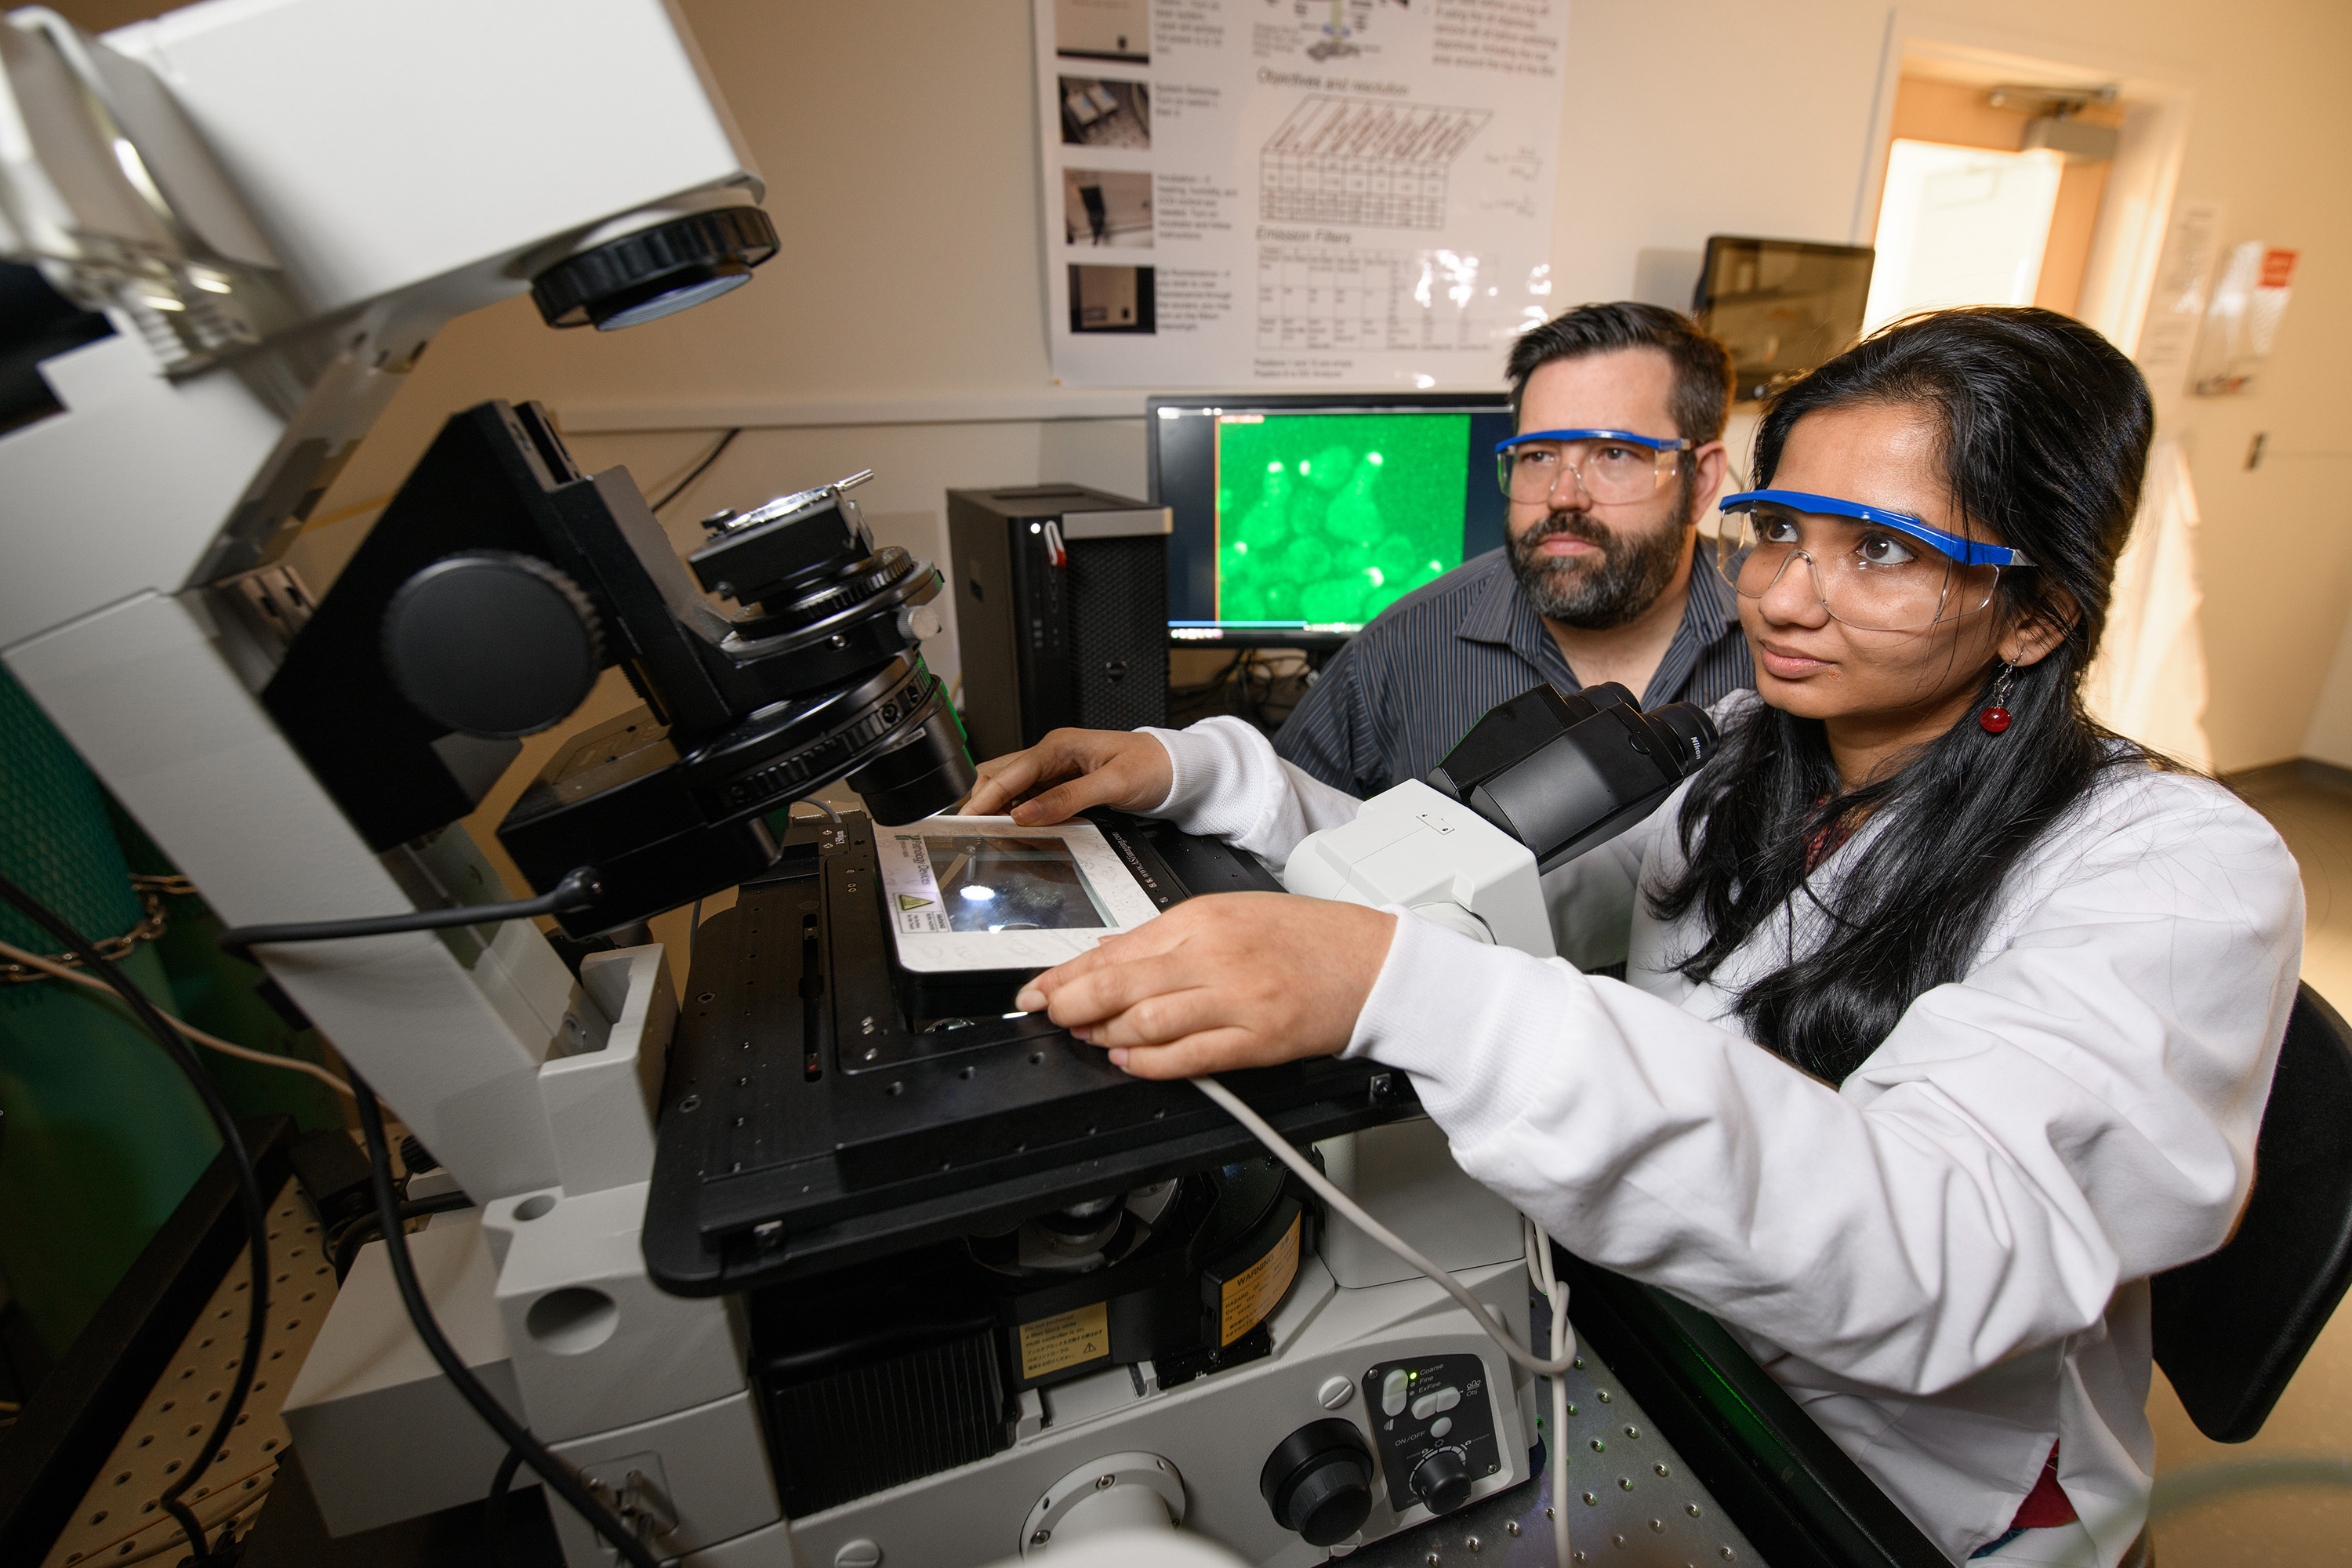 Georgia Tech Associate Professor Matthew Torres and Doctoral Candidate Shilpa Choudhury are shown with images showing cells with a localized green fluorescent protein signal at the membrane. (Credit: Rob Felt, Georgia Tech)